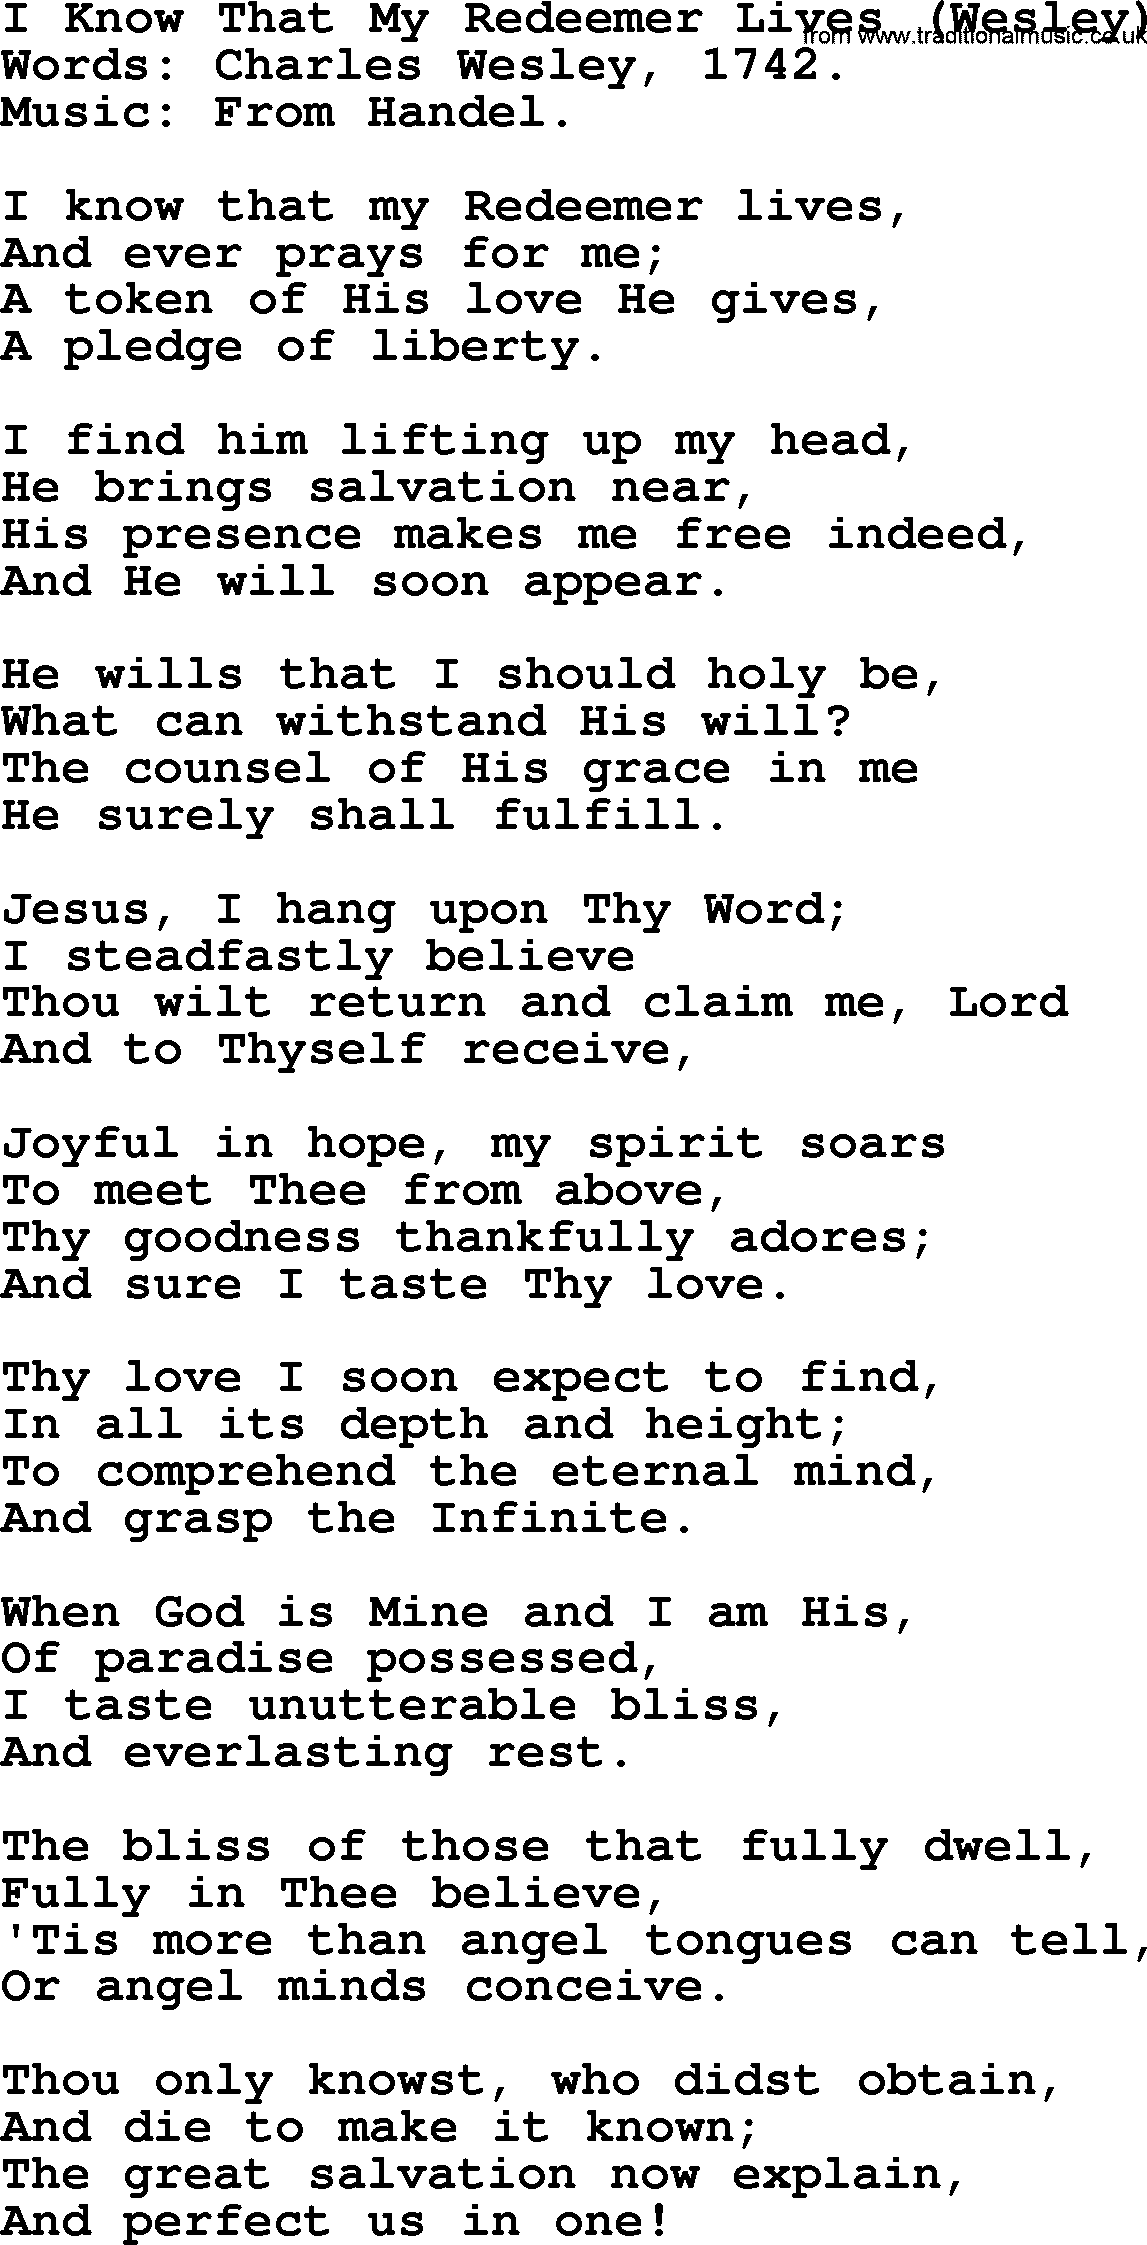 Hymns about Angels, Hymn: I Know That My Redeemer Lives (wesley).txt lyrics with PDF